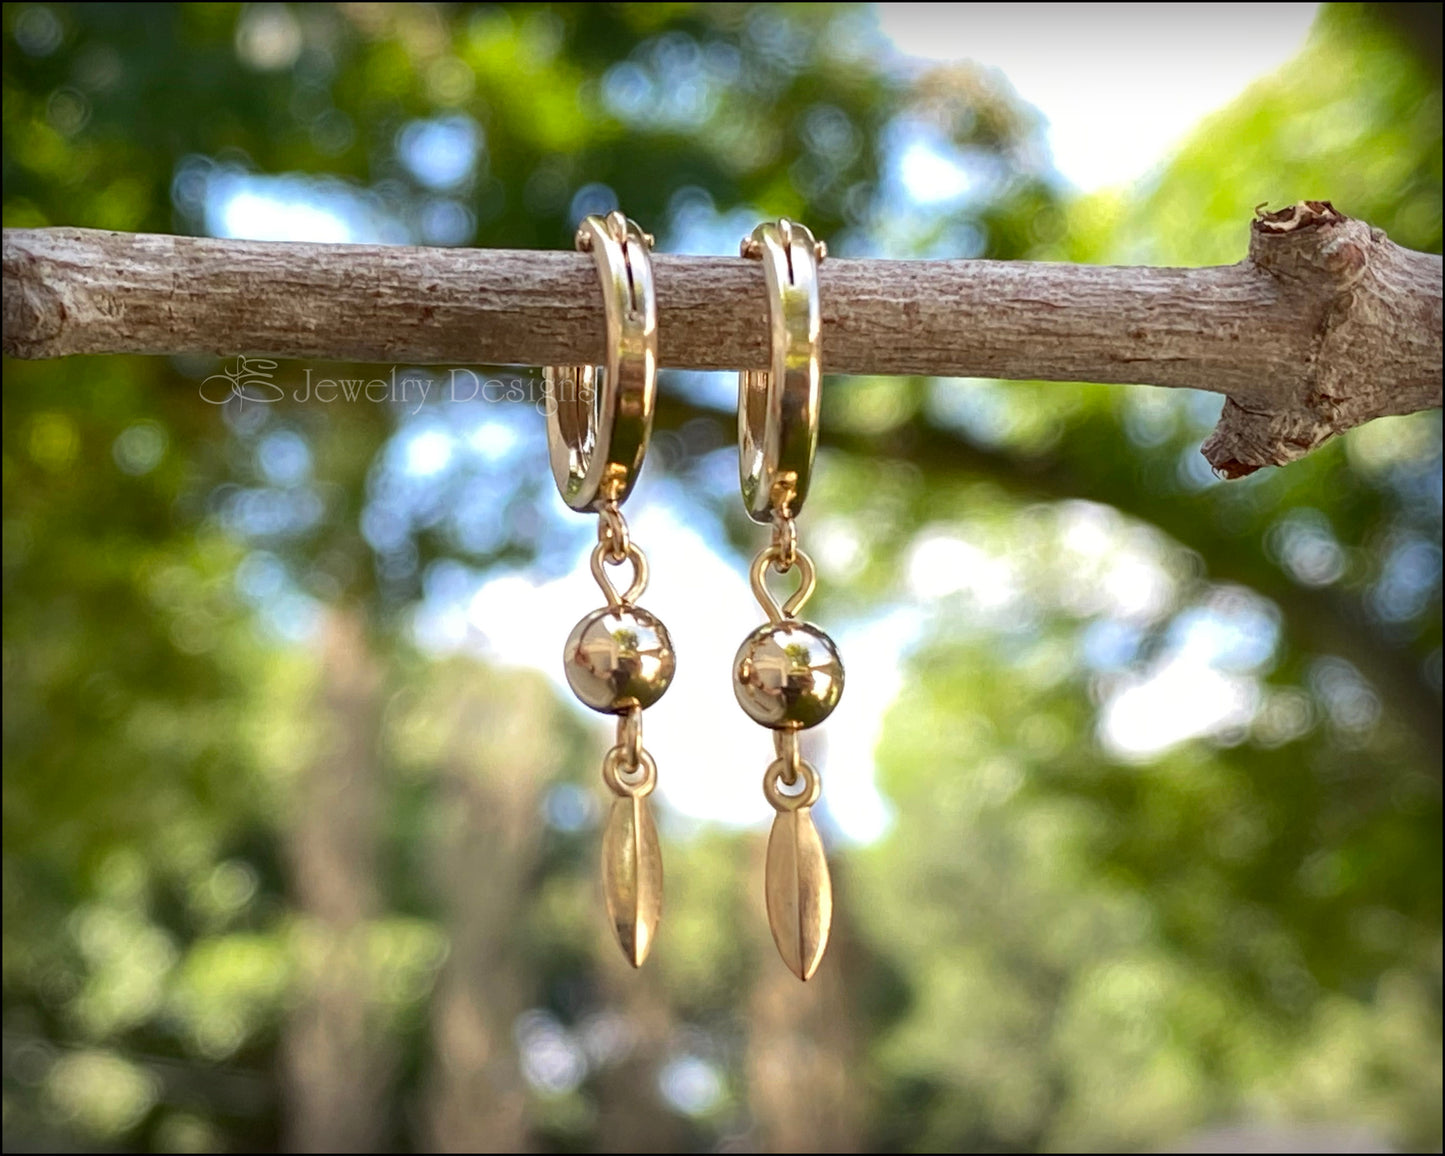 Load image into Gallery viewer, Gold Leaf Dangle Hoops - LE Jewelry Designs
